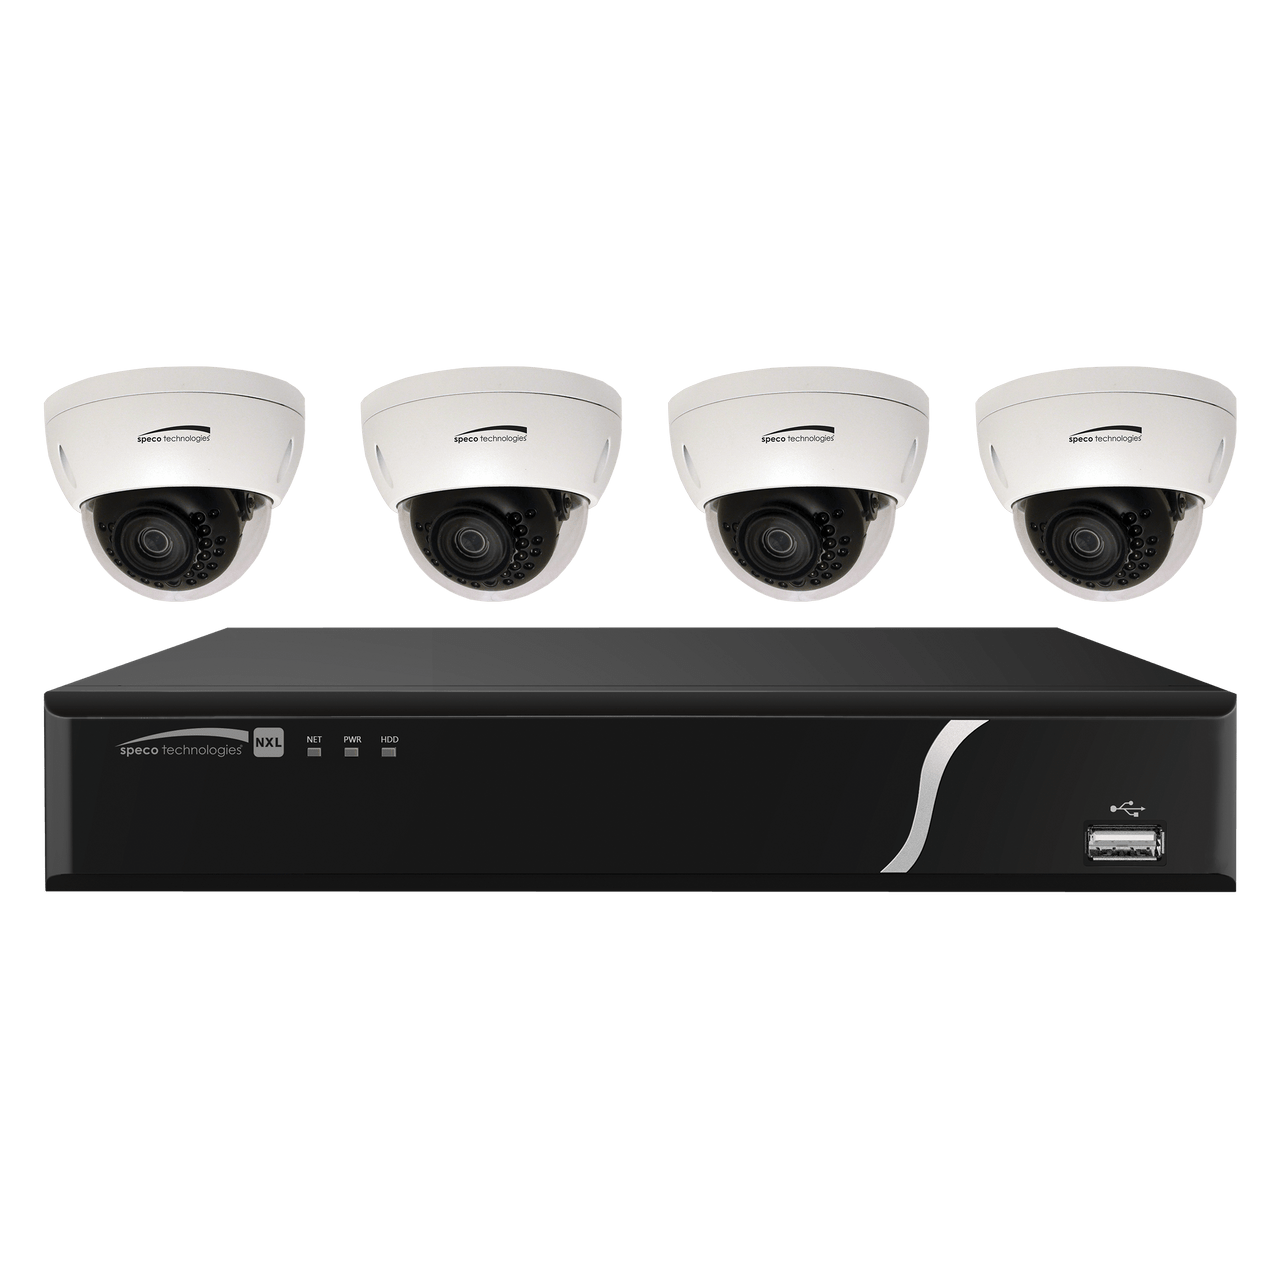 Speco Technologies ZIPL4D1 4 CH Plug-and-Play NVR w/ 4 Outdoor IR Dome 2.7-12mm motorized lens (ZIPL4D1)